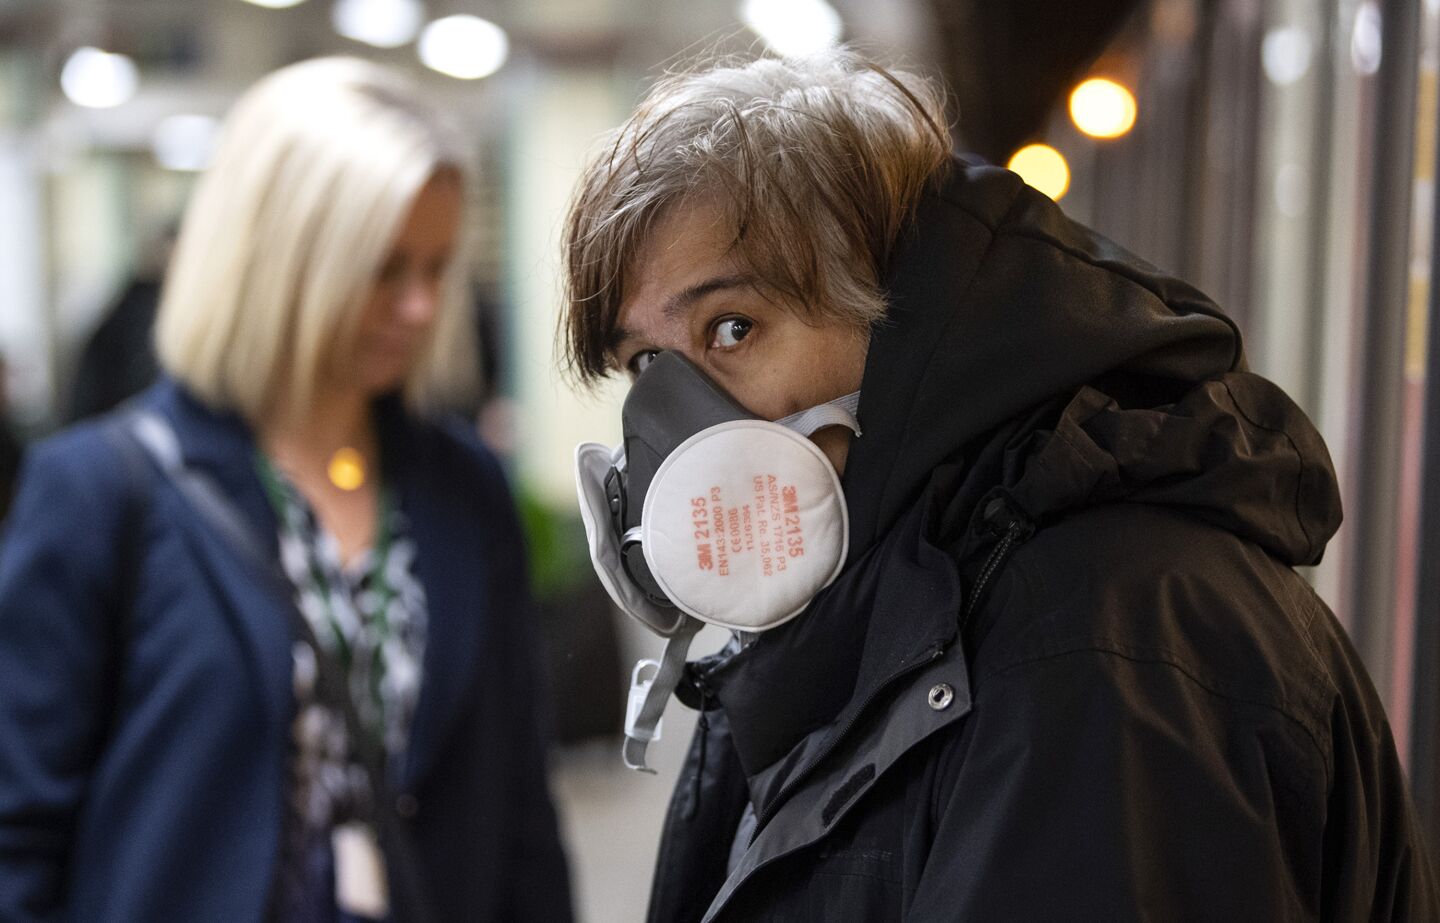 Britain: A commuter wearing a face protection mask travels on the Underground tubes.